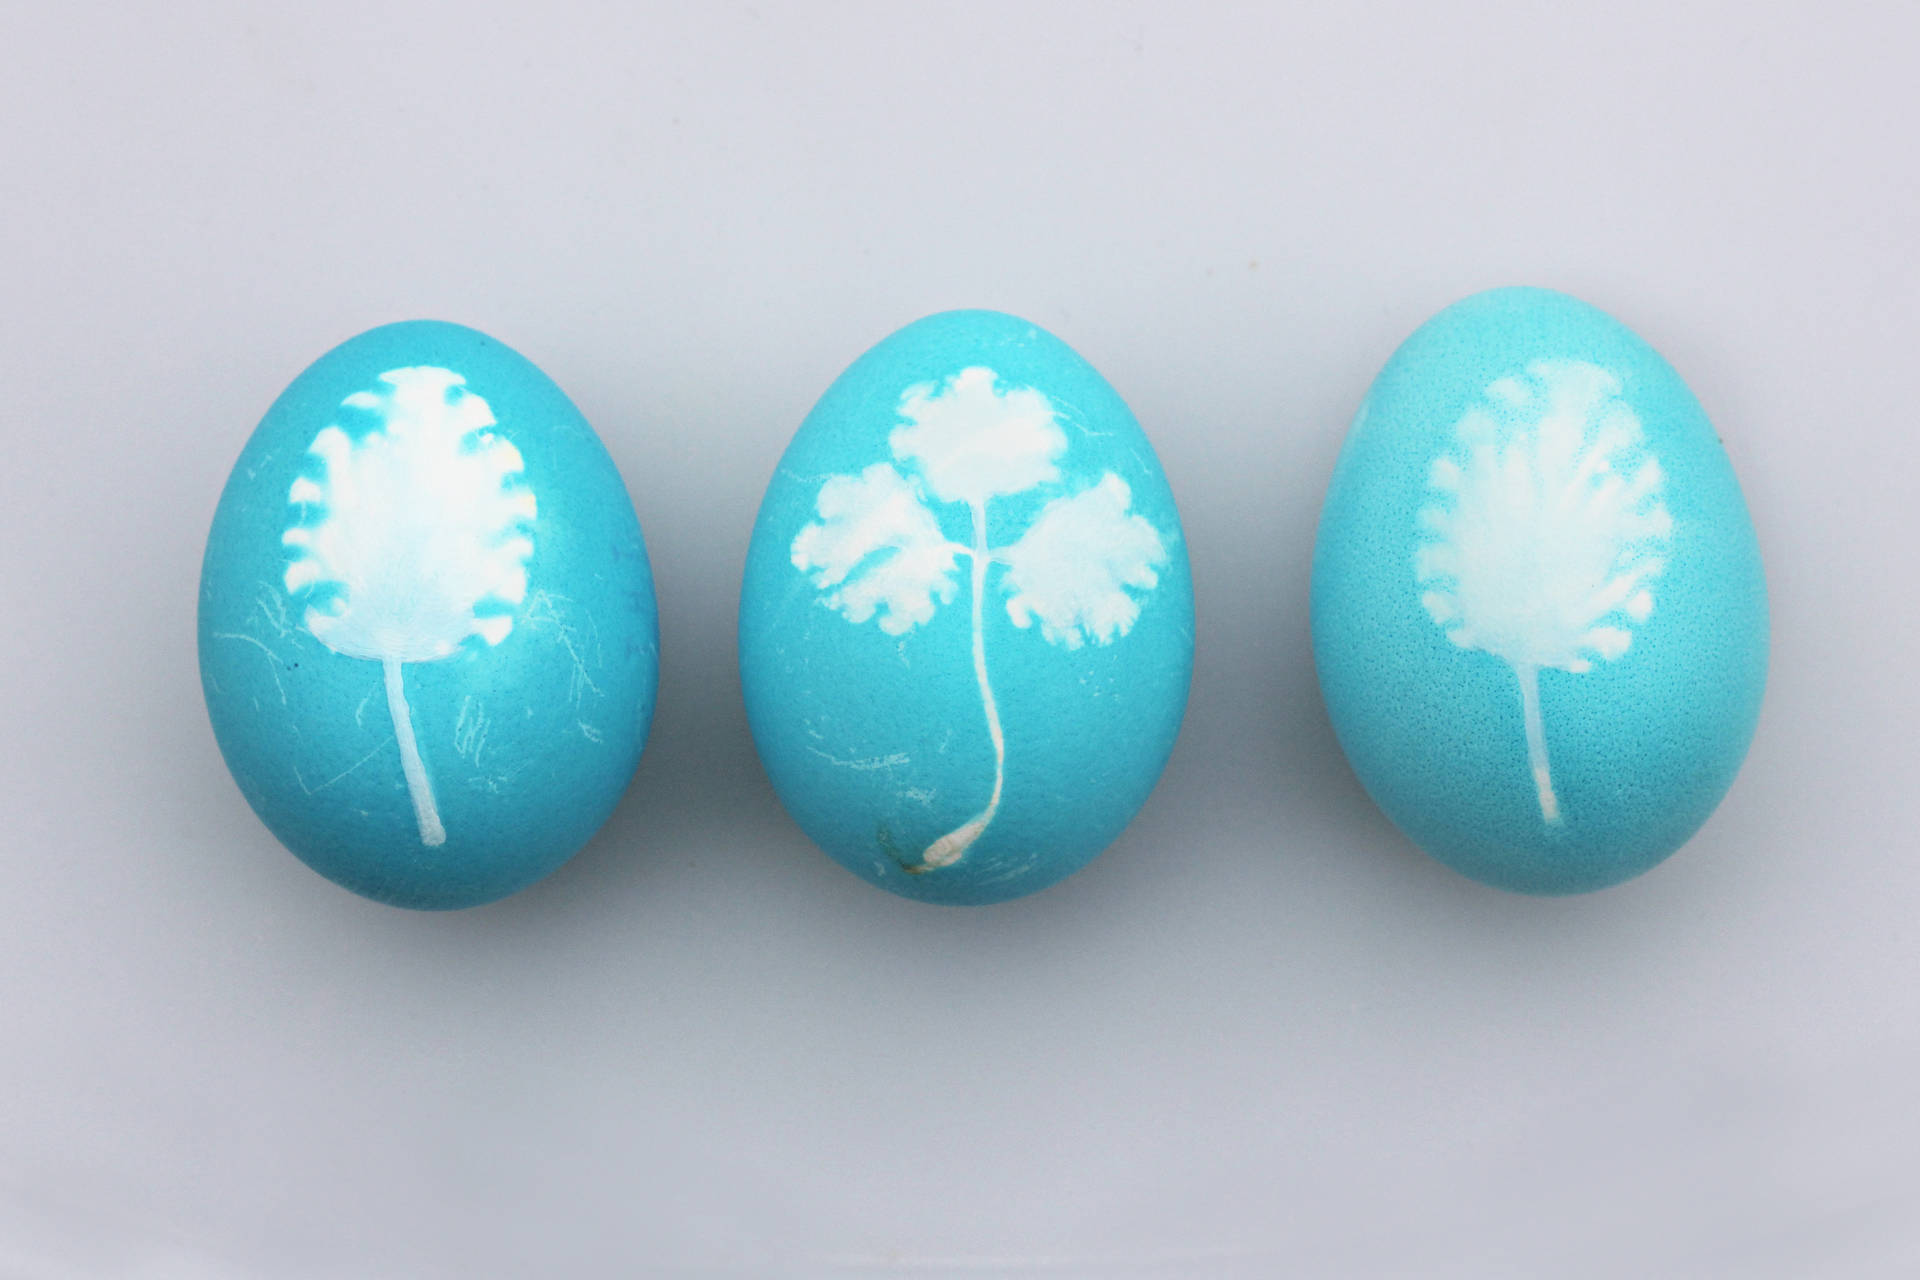 Colorful Easter eggs bring happiness to this special holiday season. Wallpaper